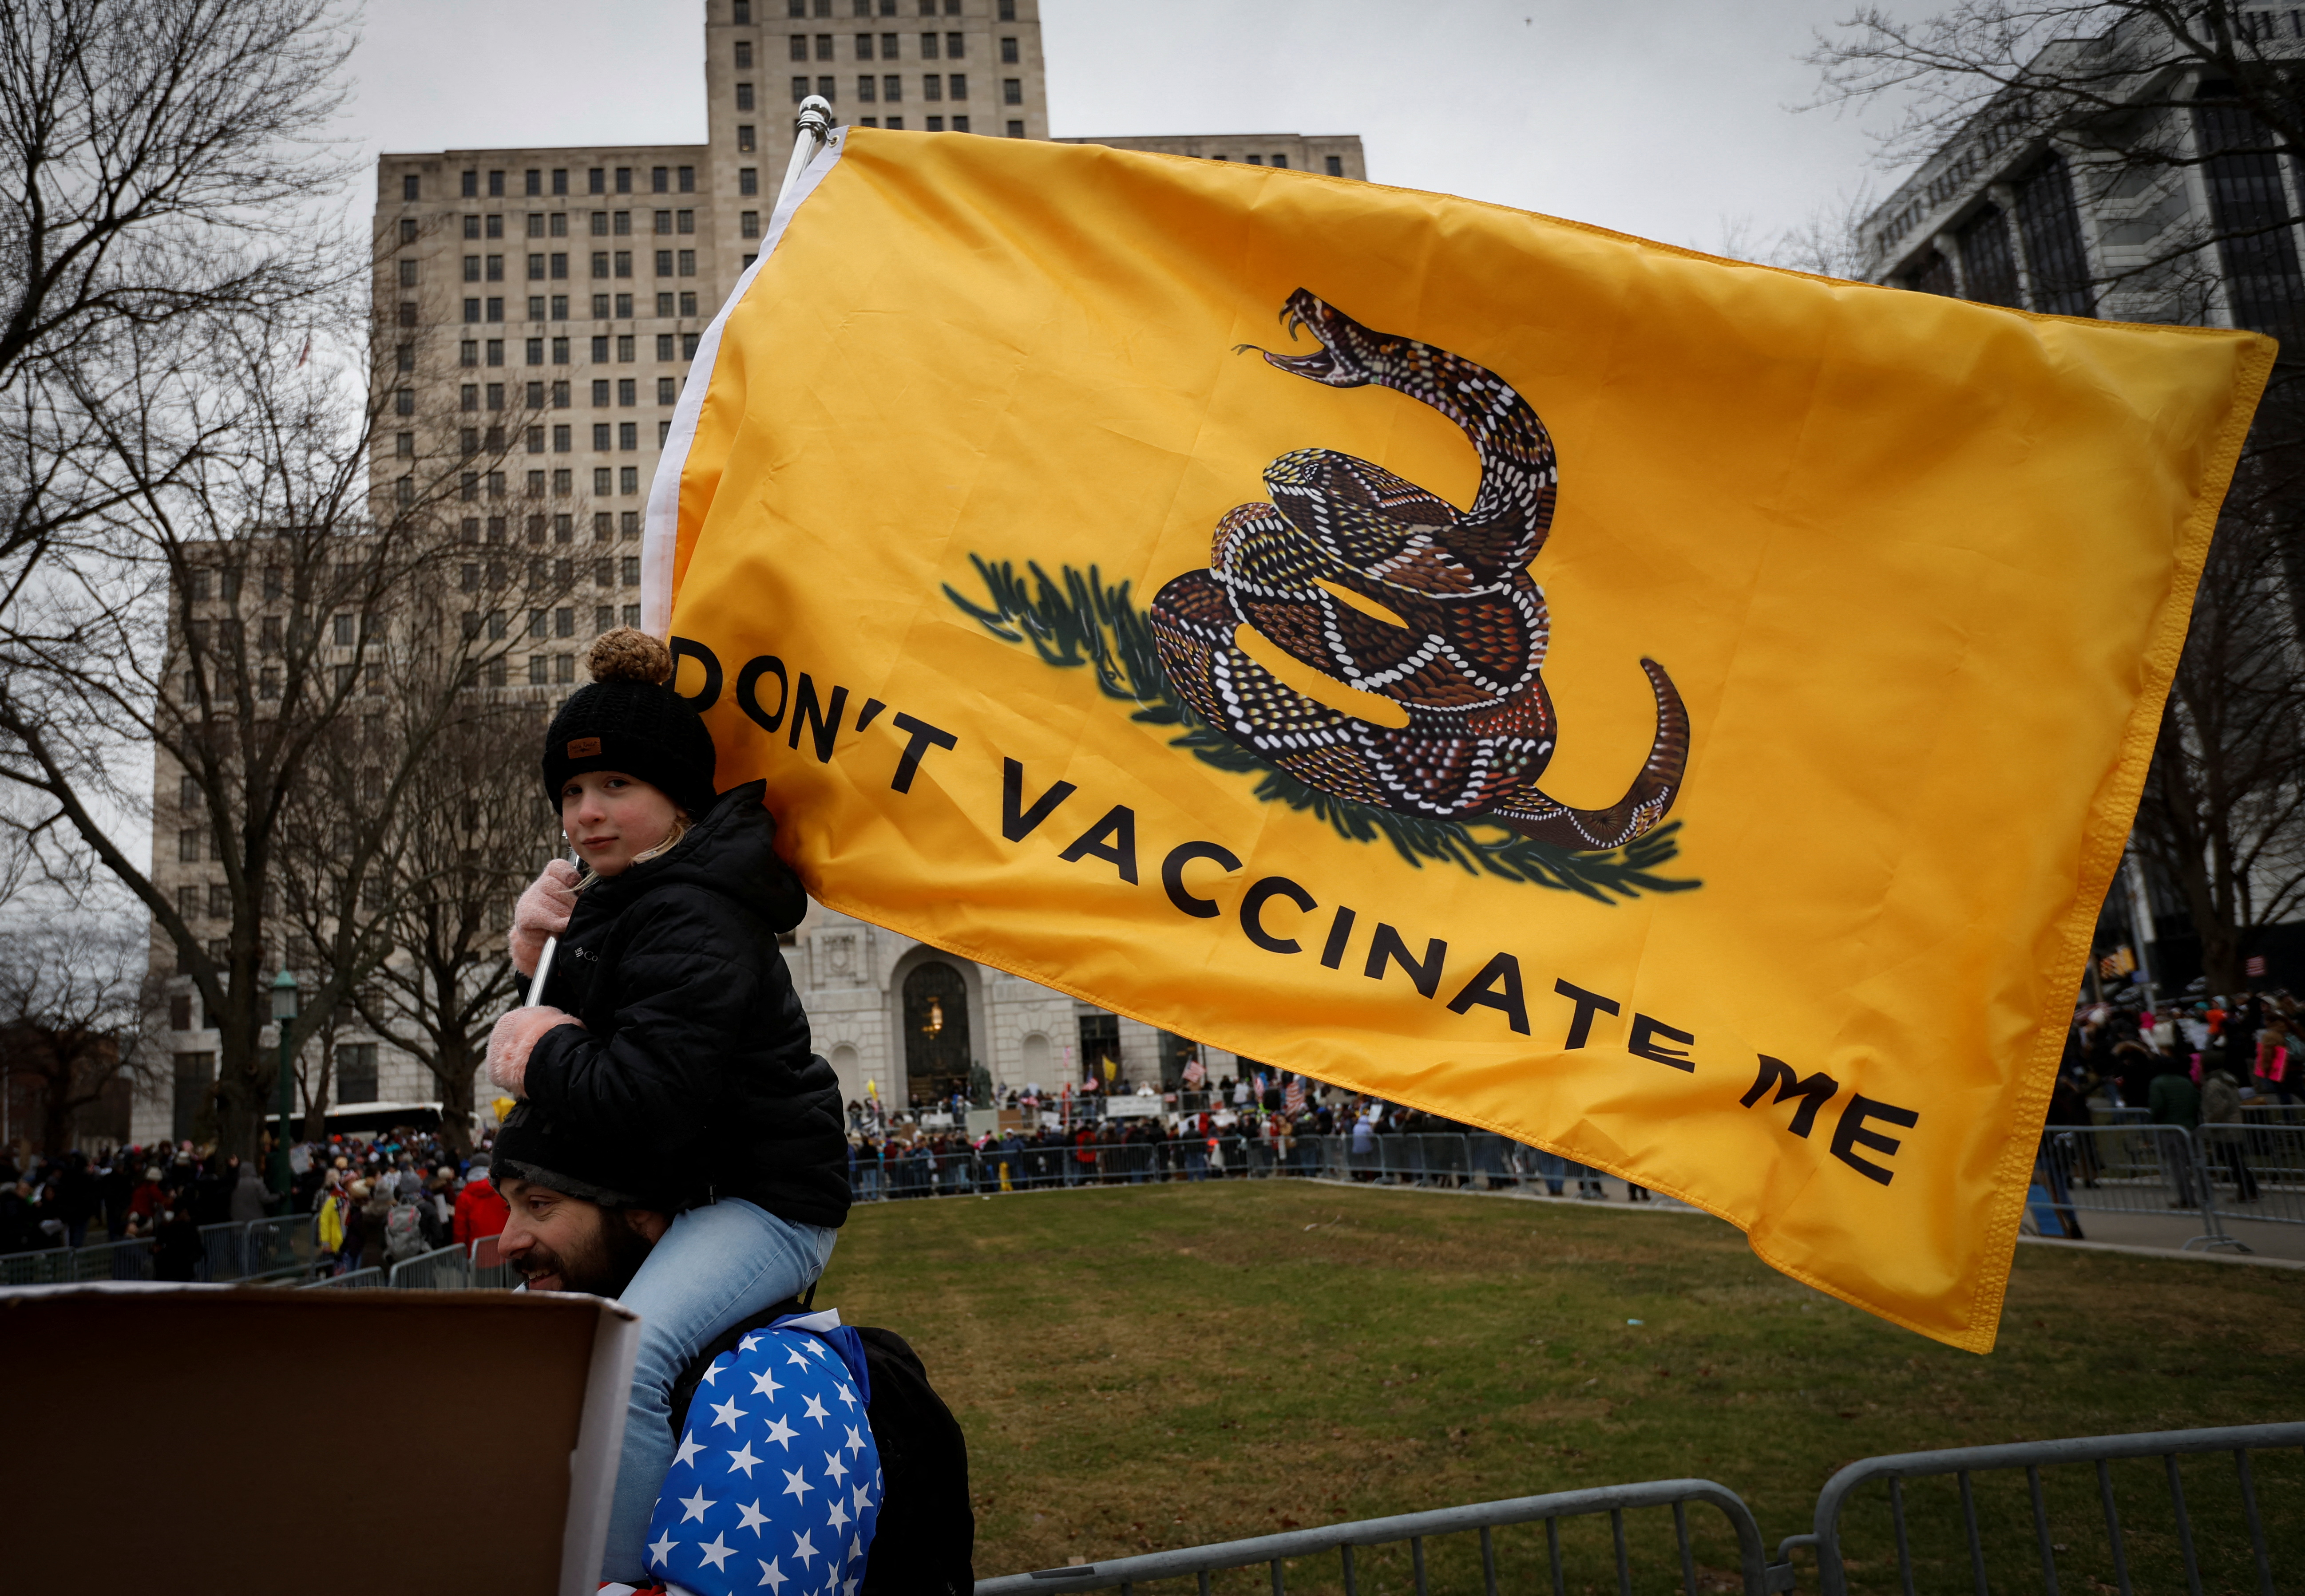 A child on a man's shoulders holds a banner at a rally against mandates for the vaccines against the coronavirus disease (COVID-19) outside the New York State Capitol in Albany, New York, U.S., January 5, 2022. REUTERS/Mike Segar